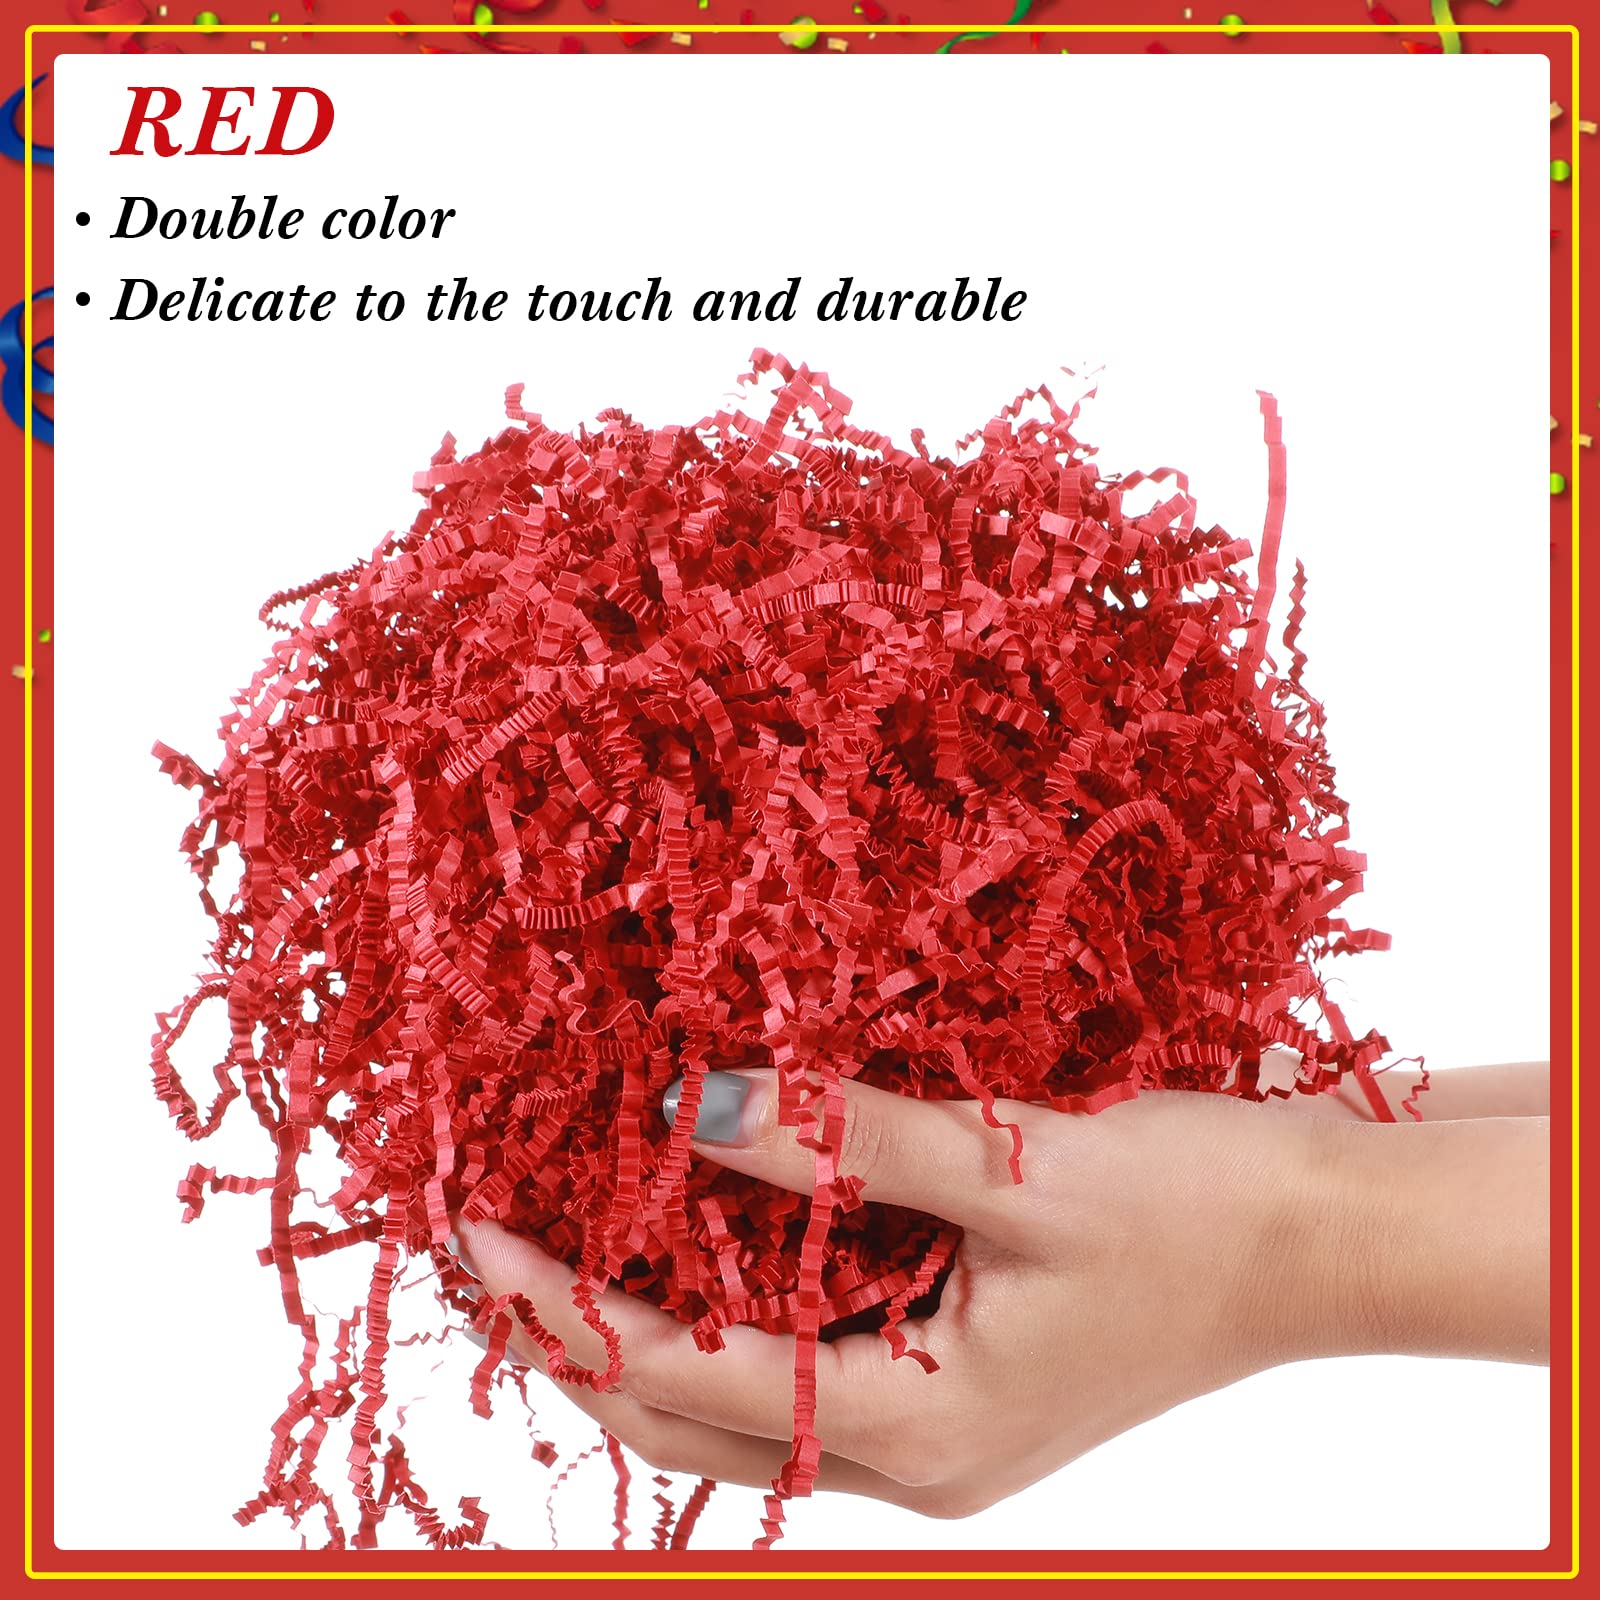 Outus 2 LB Crinkle Cut Paper Shred Filler Shredded Paper for Gift Box Crinkle Paper Metallic Shredded Crinkle Cut Paper Easter Grass Tissue Paper for Wedding Birthday Wrapping Boxes Bags (Red)